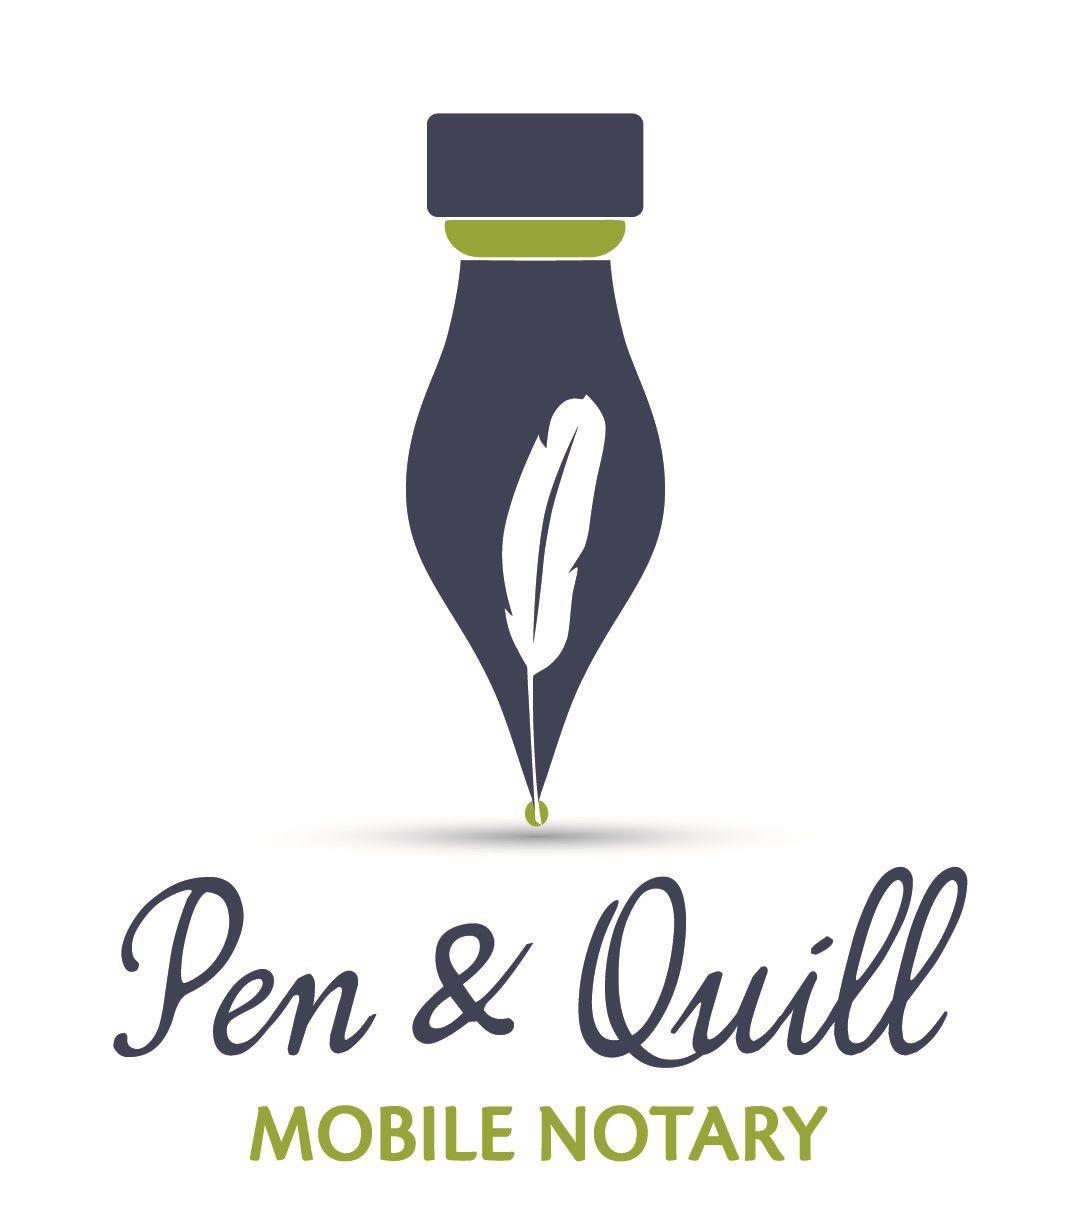 Quill Logo - Pen and Quill Logo Final - Pen and Quill Mobile Notary